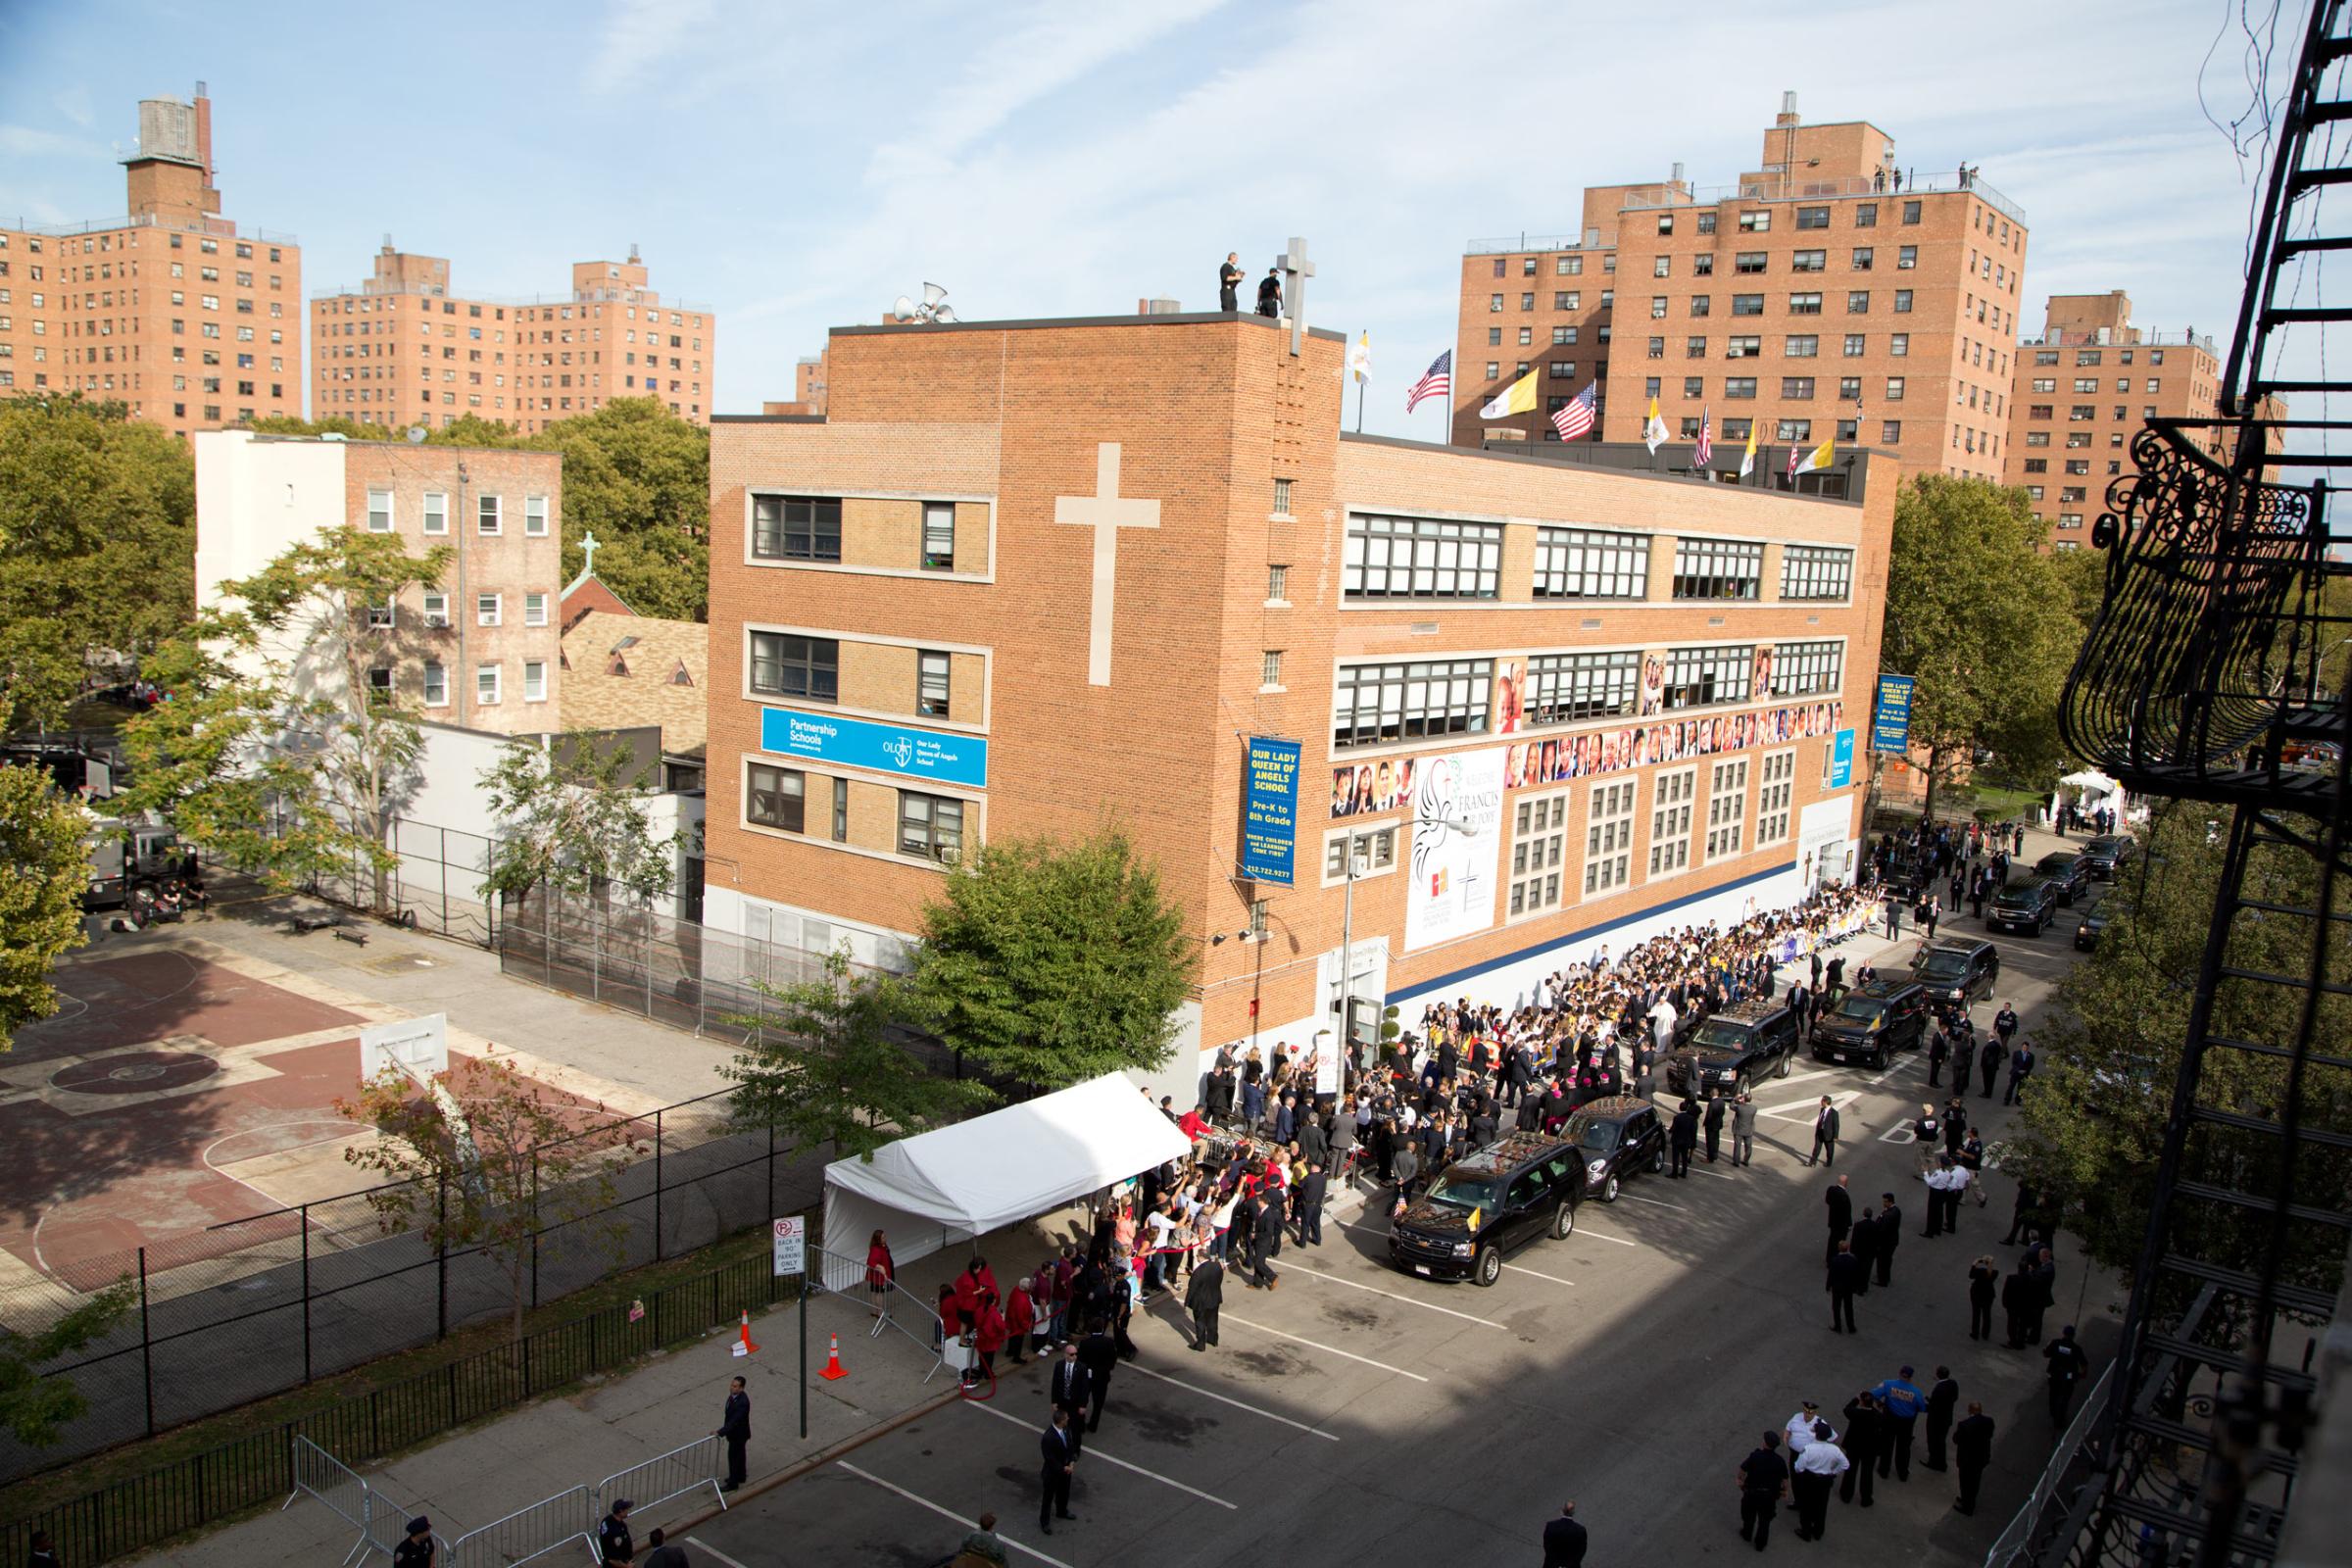 Pope Francis visits Our Lady Queen of Angels School in East Harlem, New York. Sept, 25, 2015. Tobias Hutzler for TIME